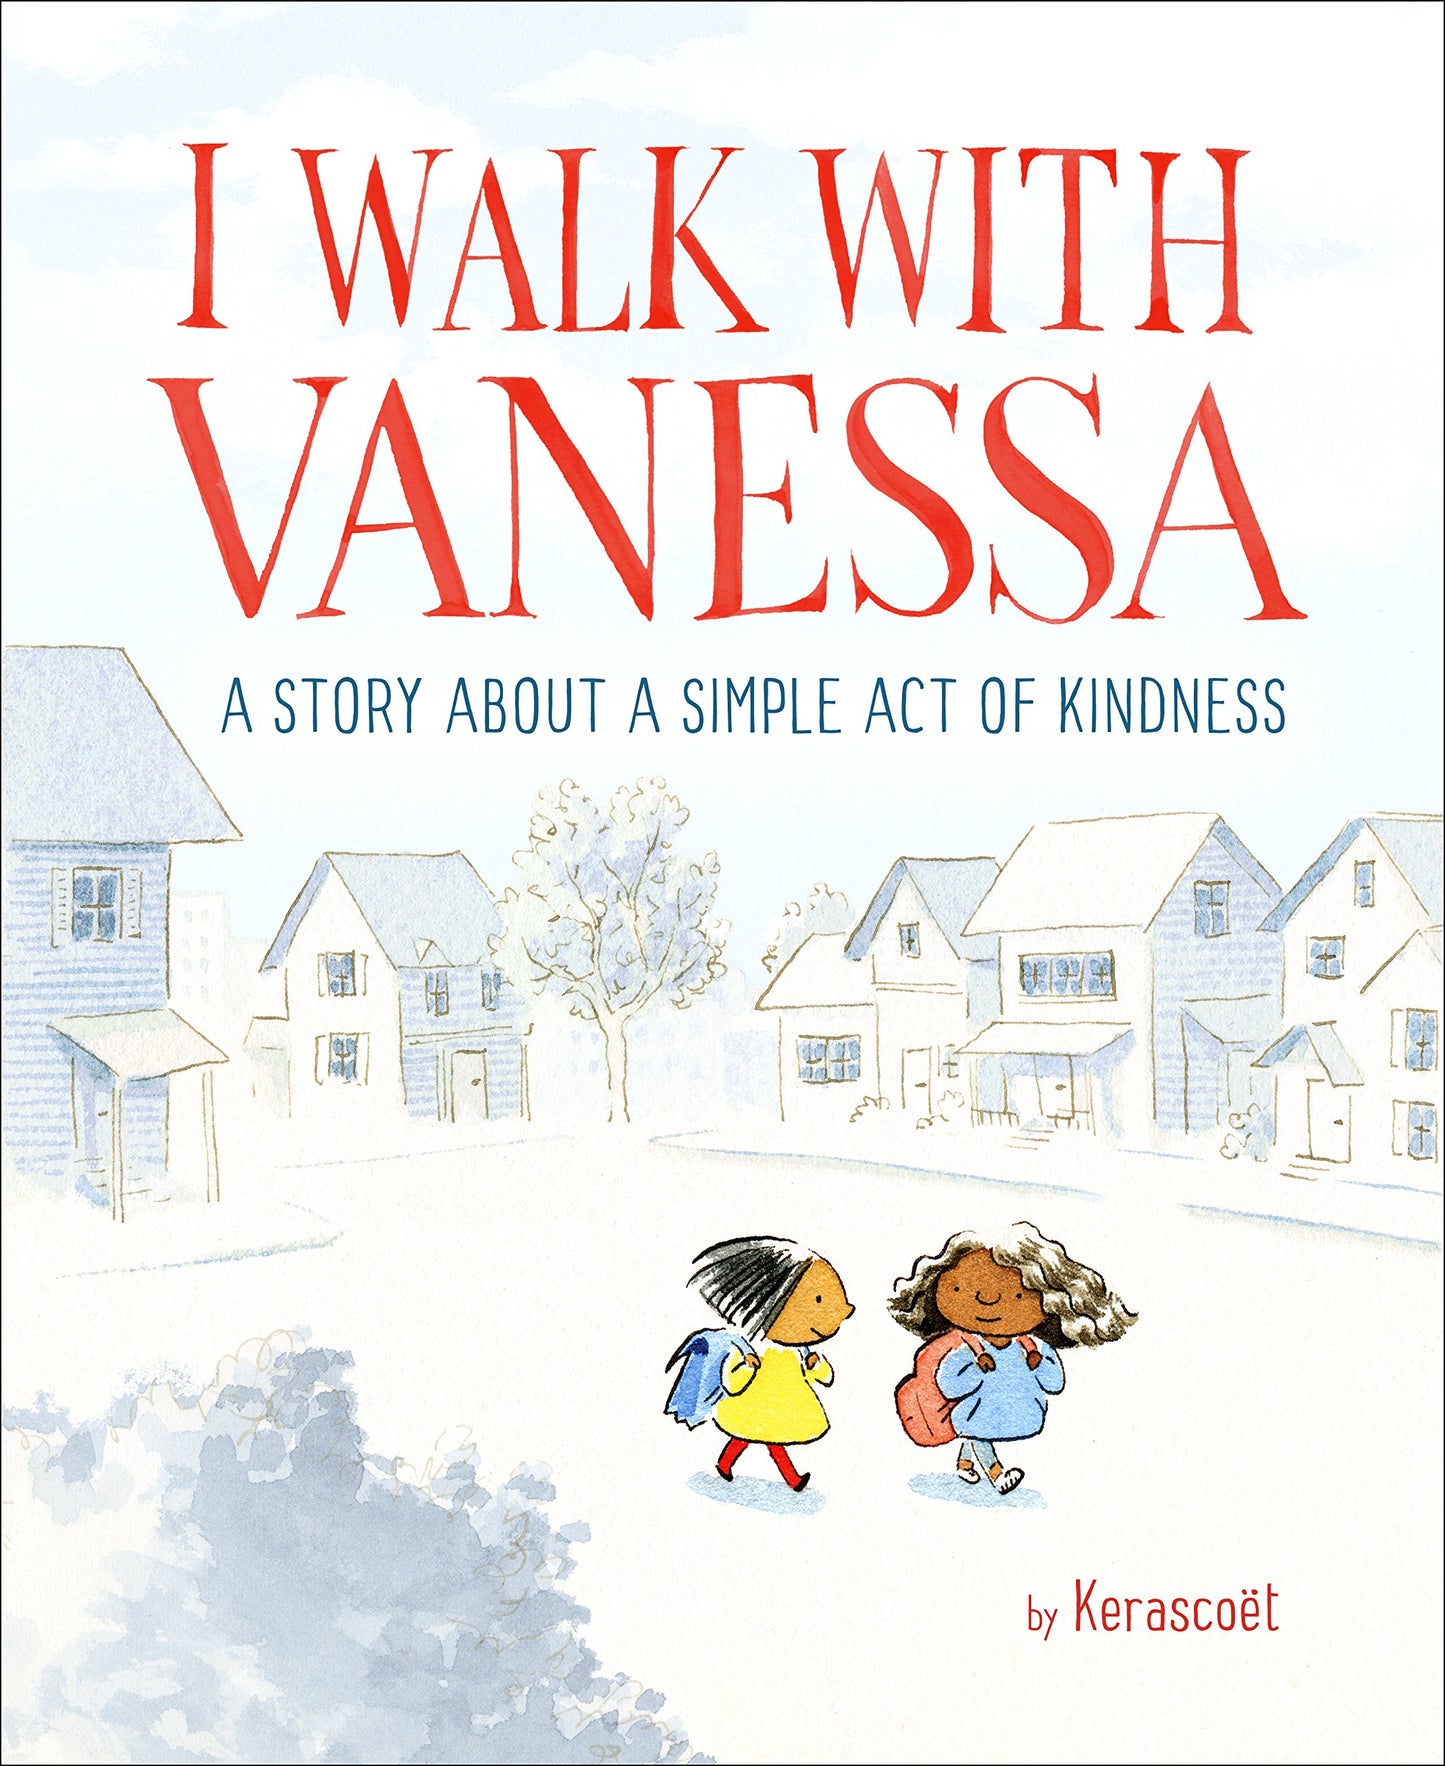 I Walk With Vanessa A Simple Story About a simple Act of Kindness